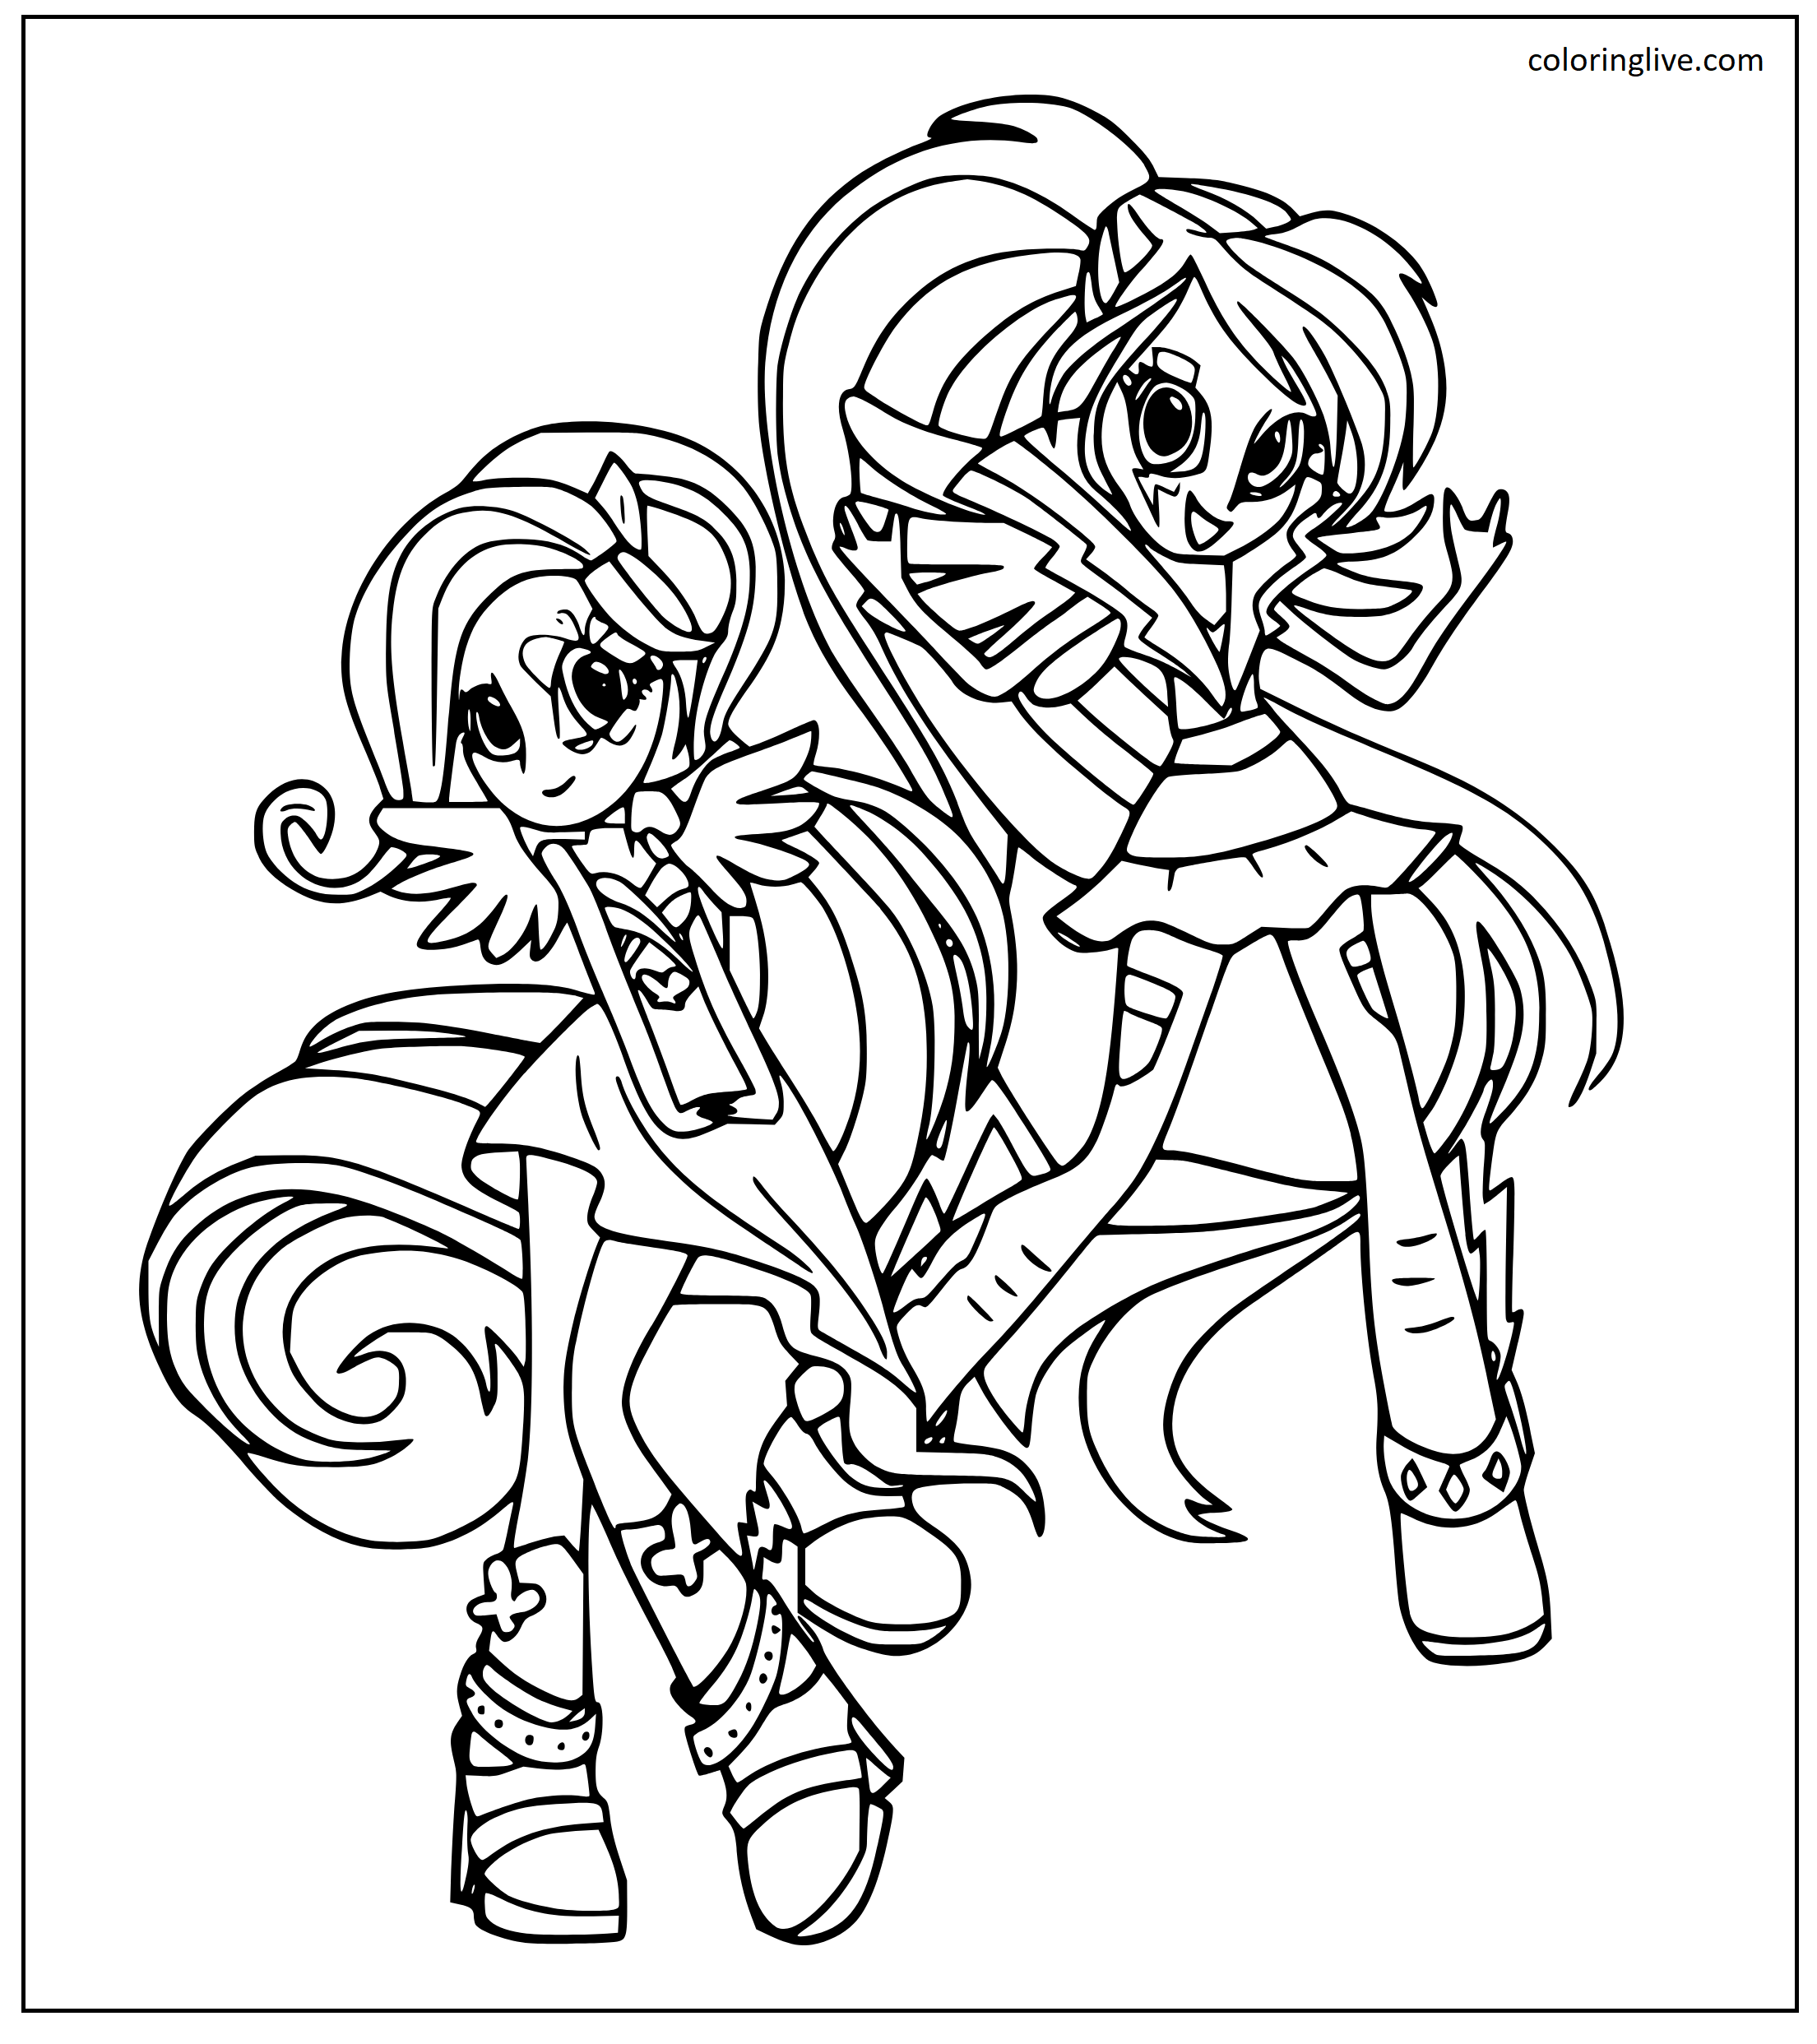 Printable Fluttershy and Rainbow Dash together Coloring Page for kids.